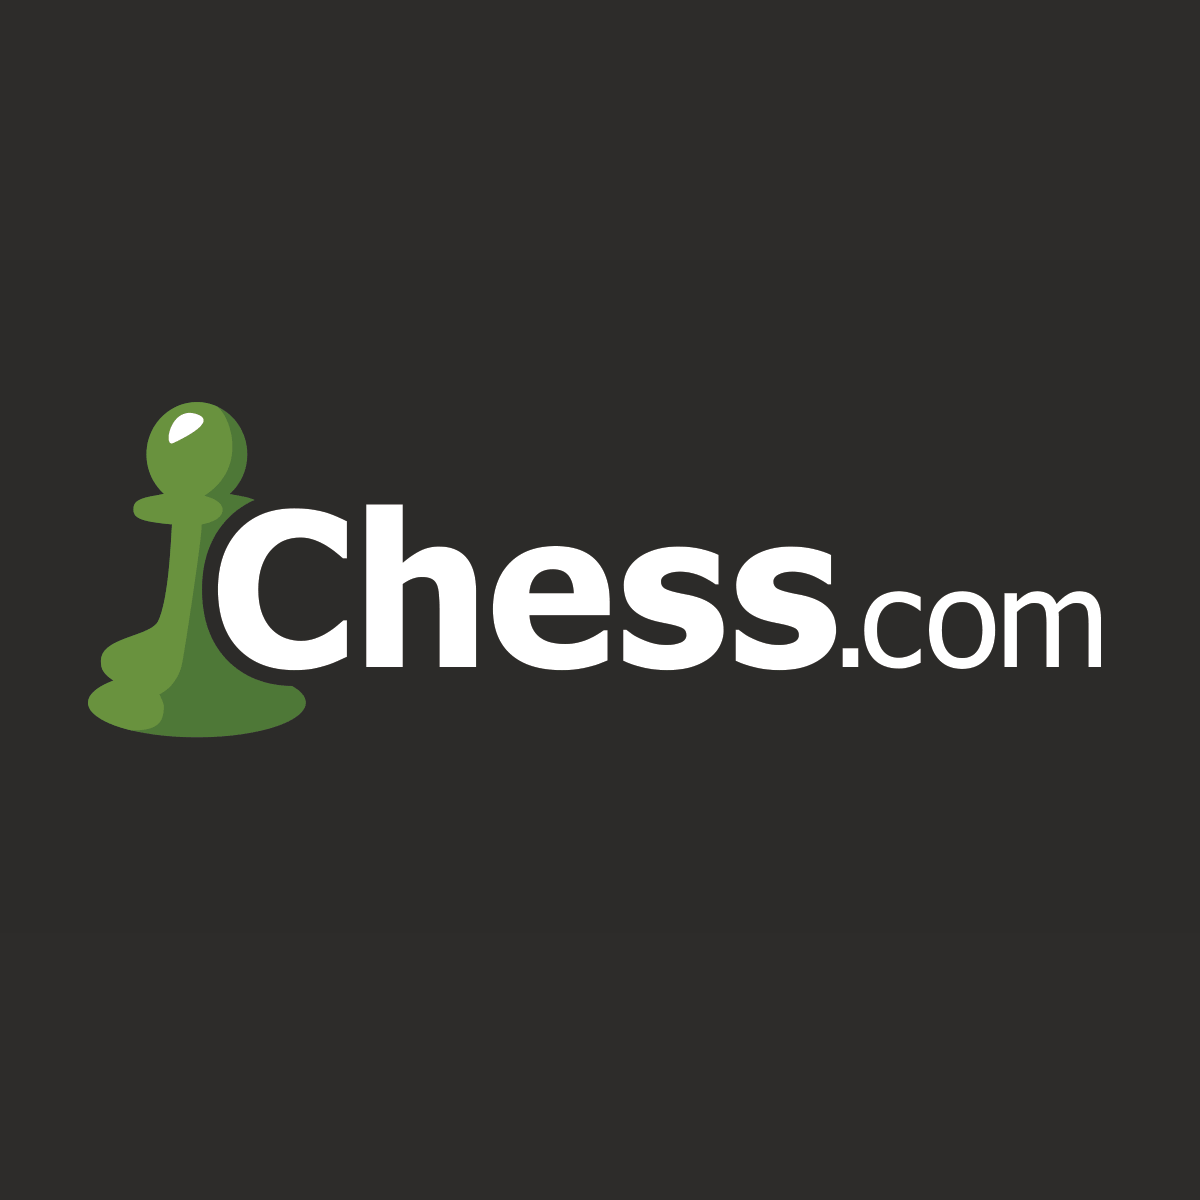 online chess to help in real games